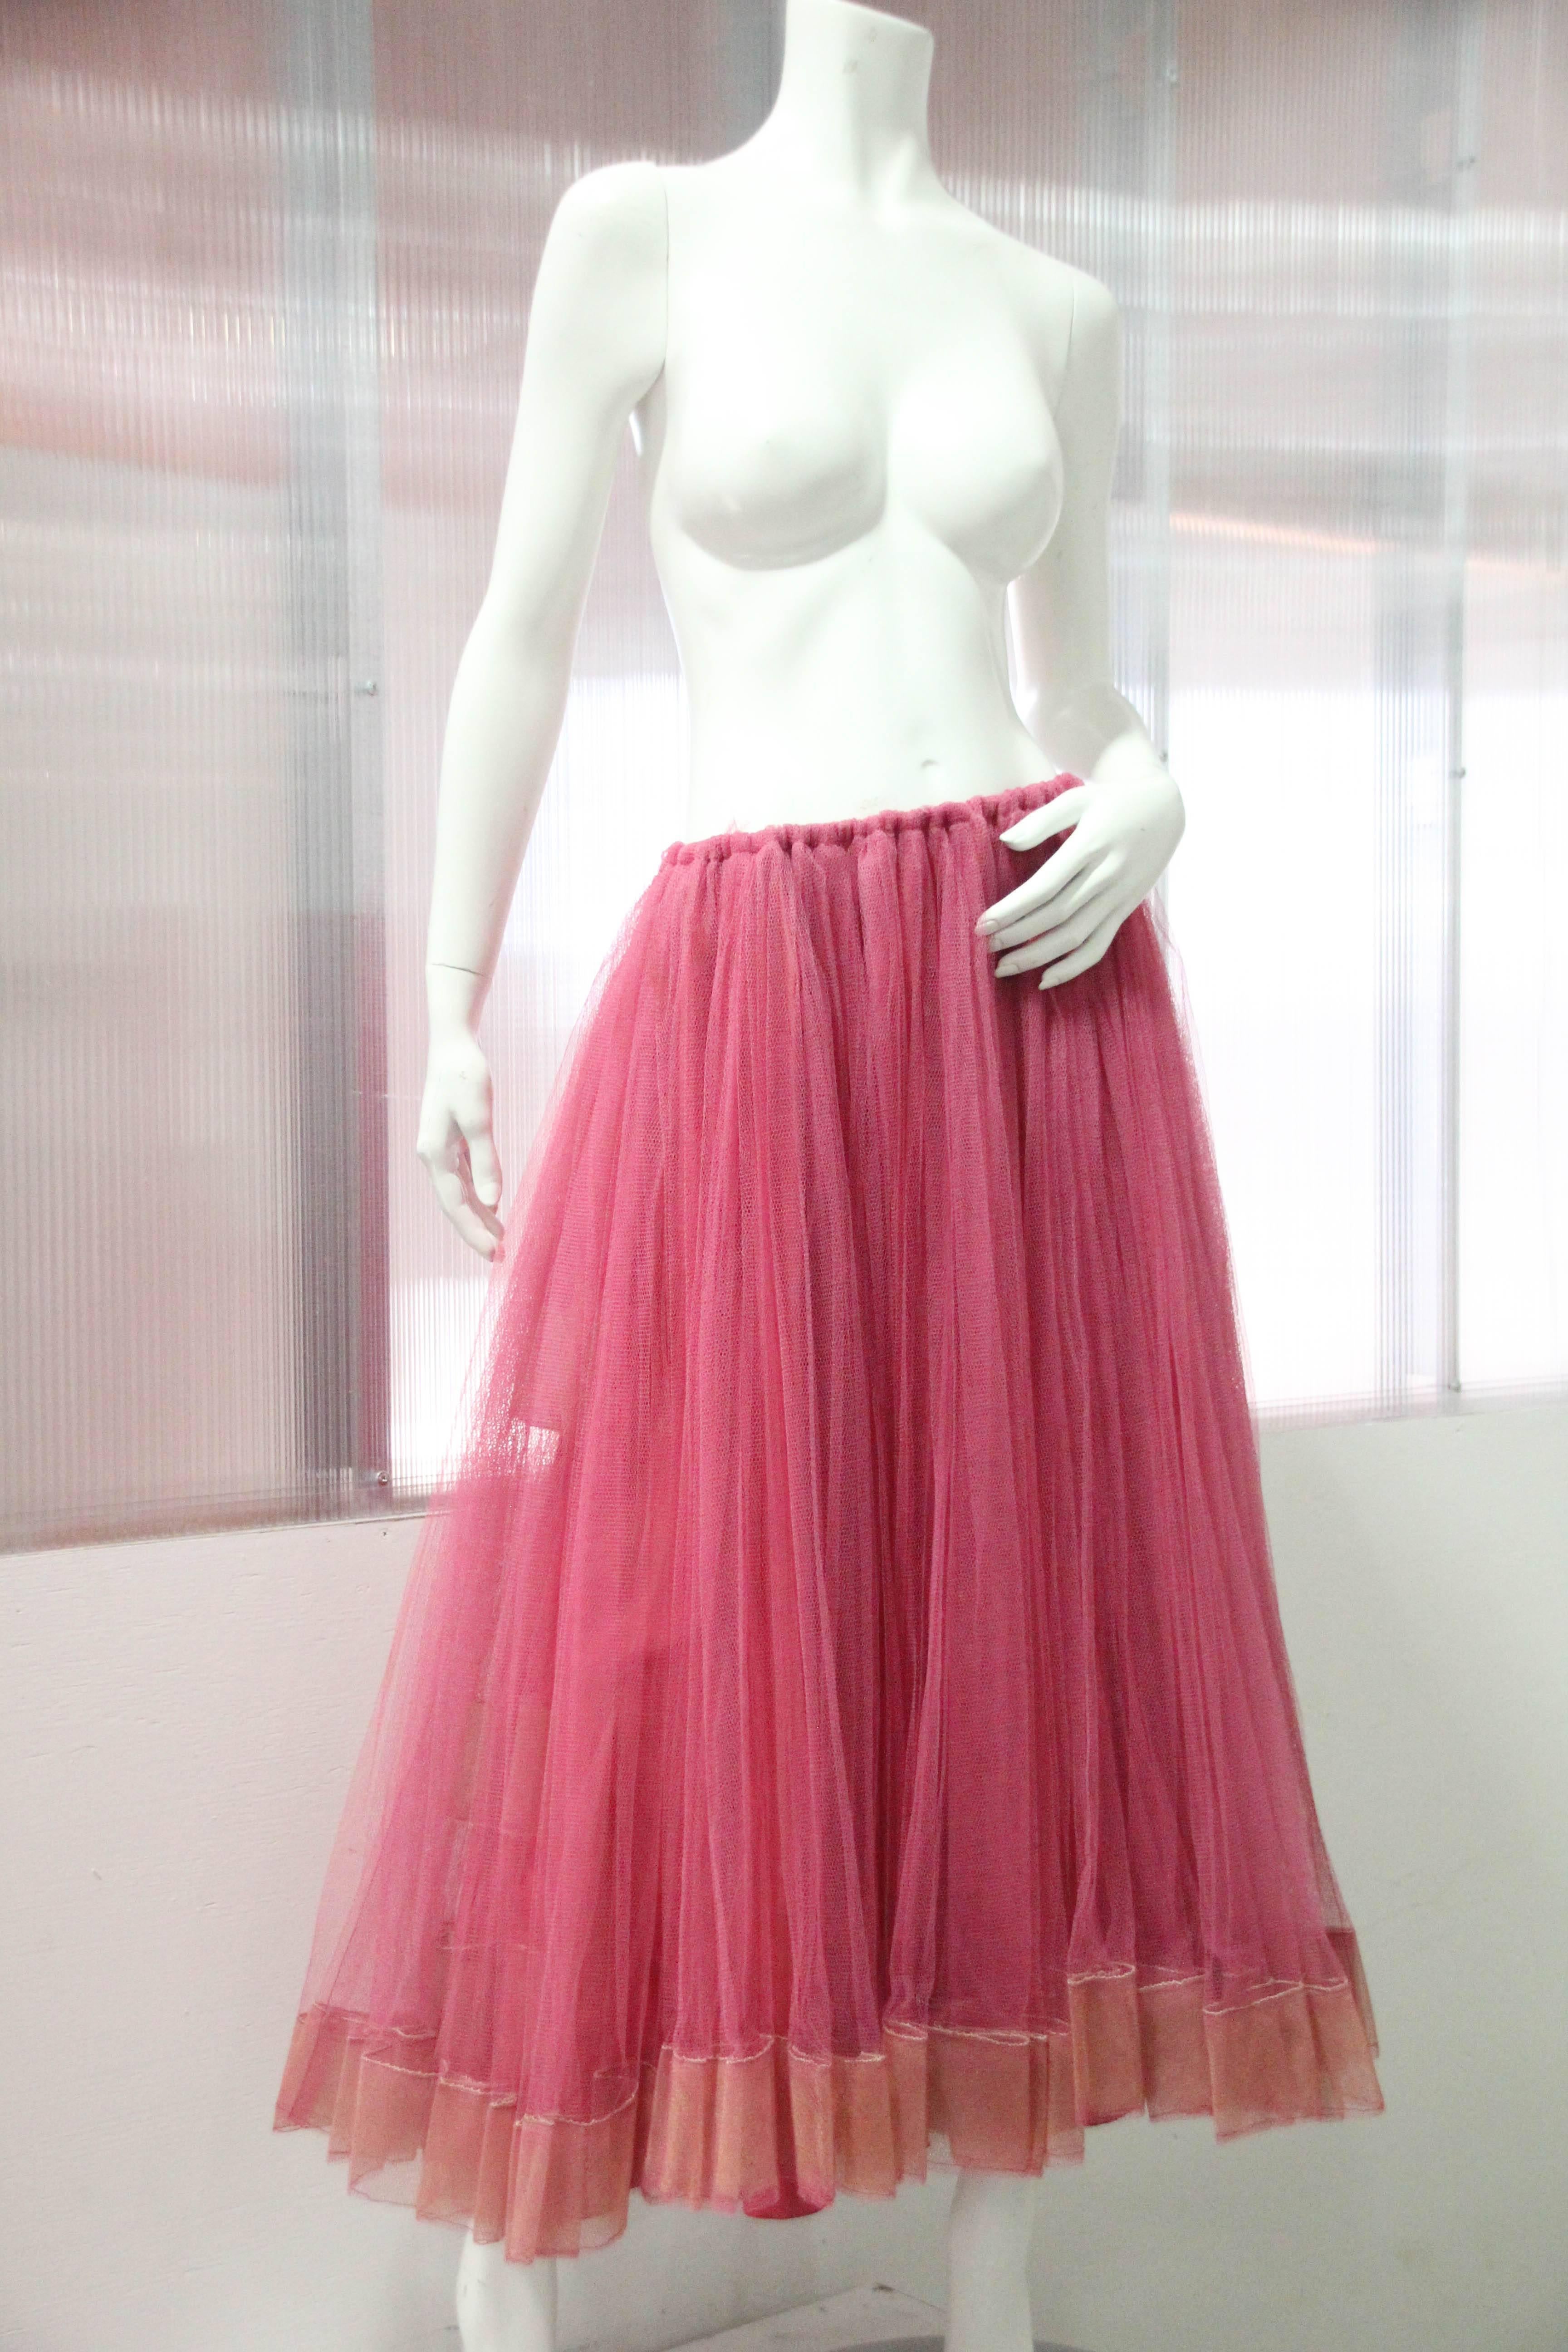 1950s Melon-color tulle crinoline with many layers of tulle and horsehair trim, silk lined and elastic waist. This underskirt was salvaged from an incredible demi couture gown and was created to be worn under or without an evening gown.
Color varies